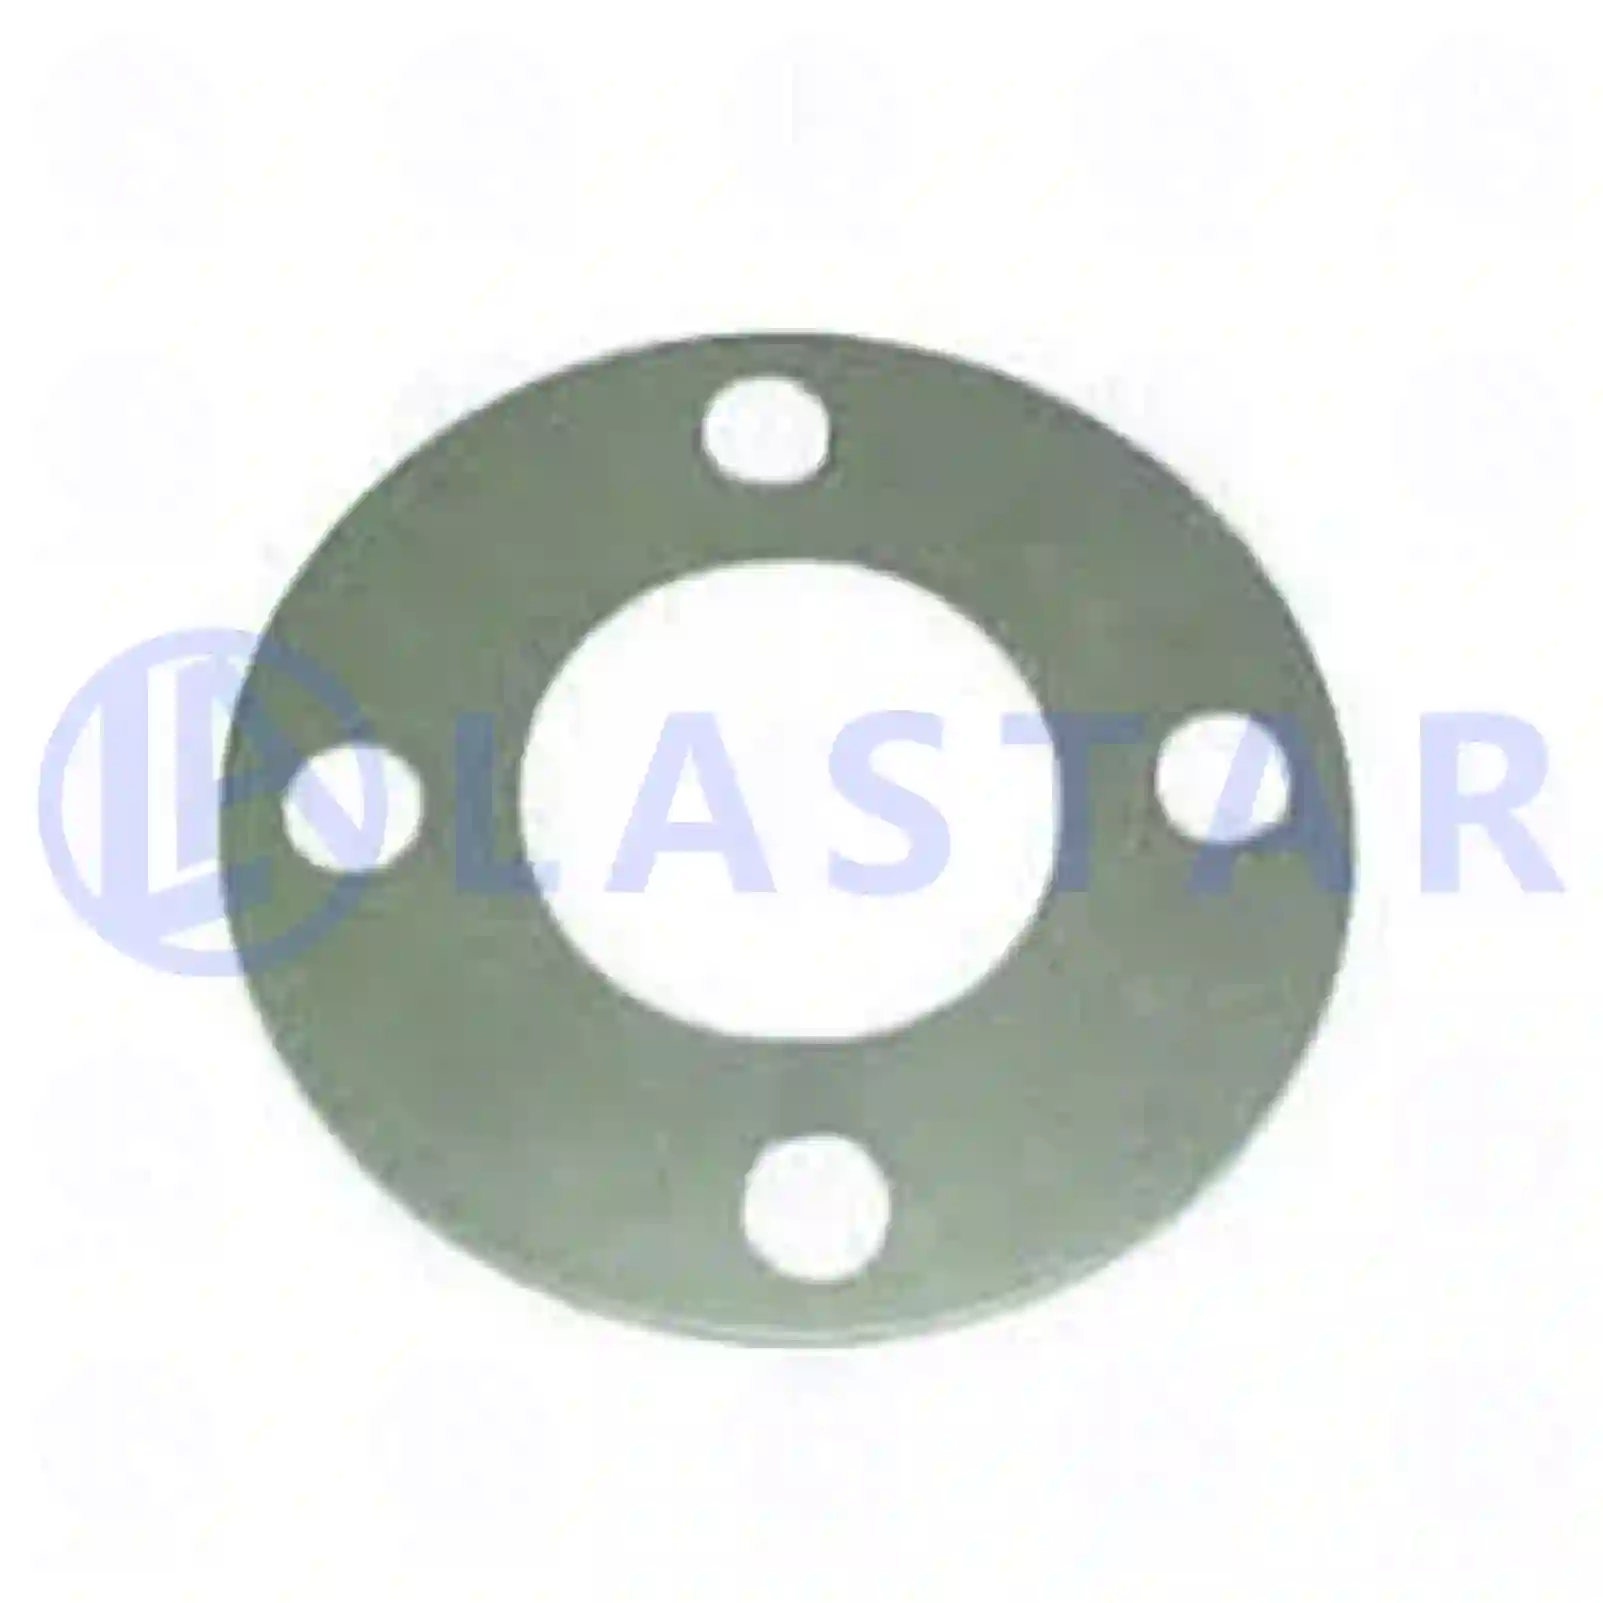 Washer, injection coupling, 77723715, V836316806000, 88113080202, 0000770325, 0000770425, 0000770435, 1340133, 192638, 1953771 ||  77723715 Lastar Spare Part | Truck Spare Parts, Auotomotive Spare Parts Washer, injection coupling, 77723715, V836316806000, 88113080202, 0000770325, 0000770425, 0000770435, 1340133, 192638, 1953771 ||  77723715 Lastar Spare Part | Truck Spare Parts, Auotomotive Spare Parts